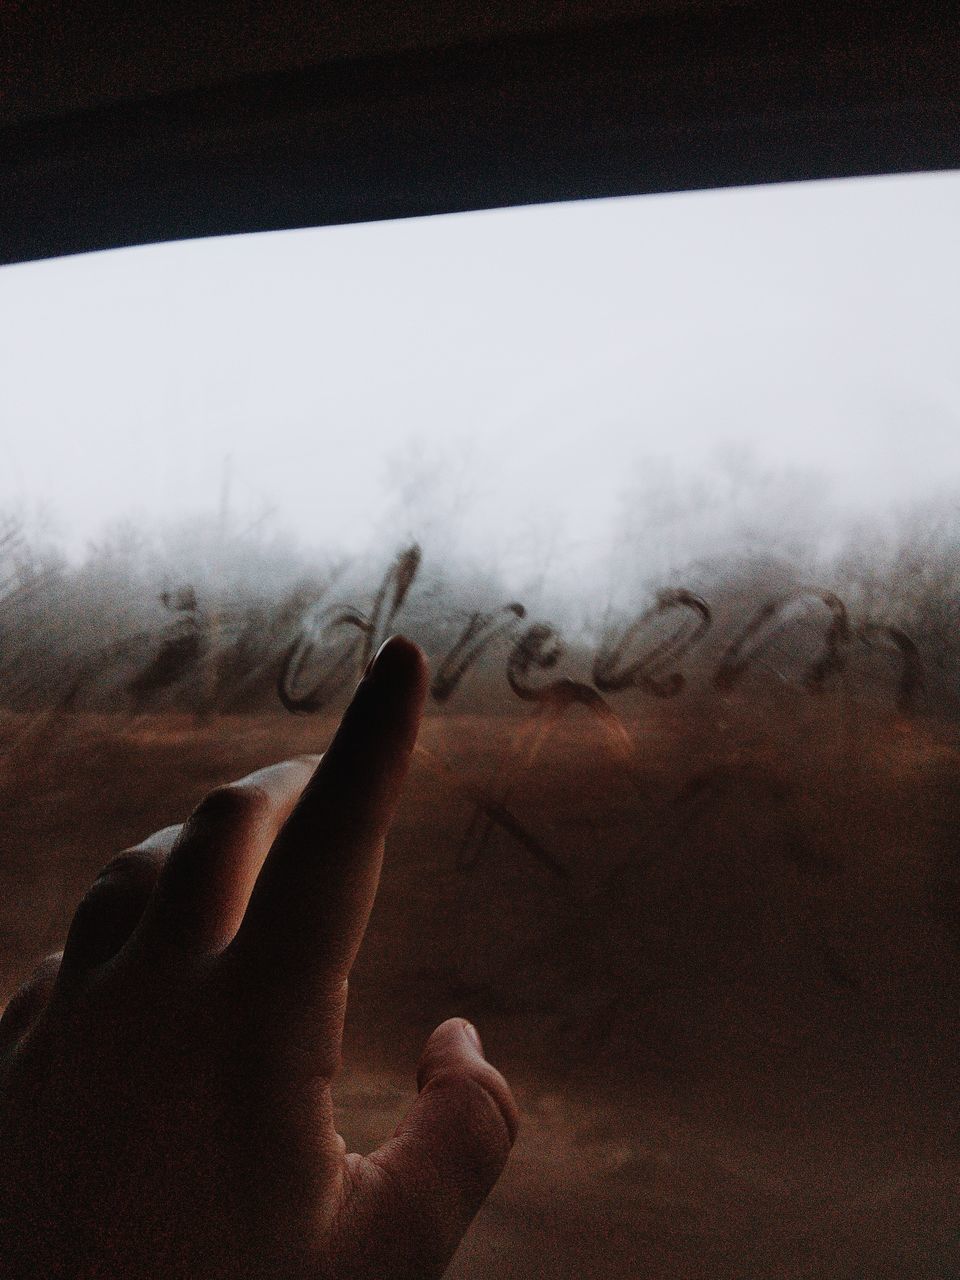 human hand, hand, human body part, real people, one person, body part, human finger, finger, unrecognizable person, smoke - physical structure, personal perspective, nature, lifestyles, sky, outdoors, leisure activity, day, fog